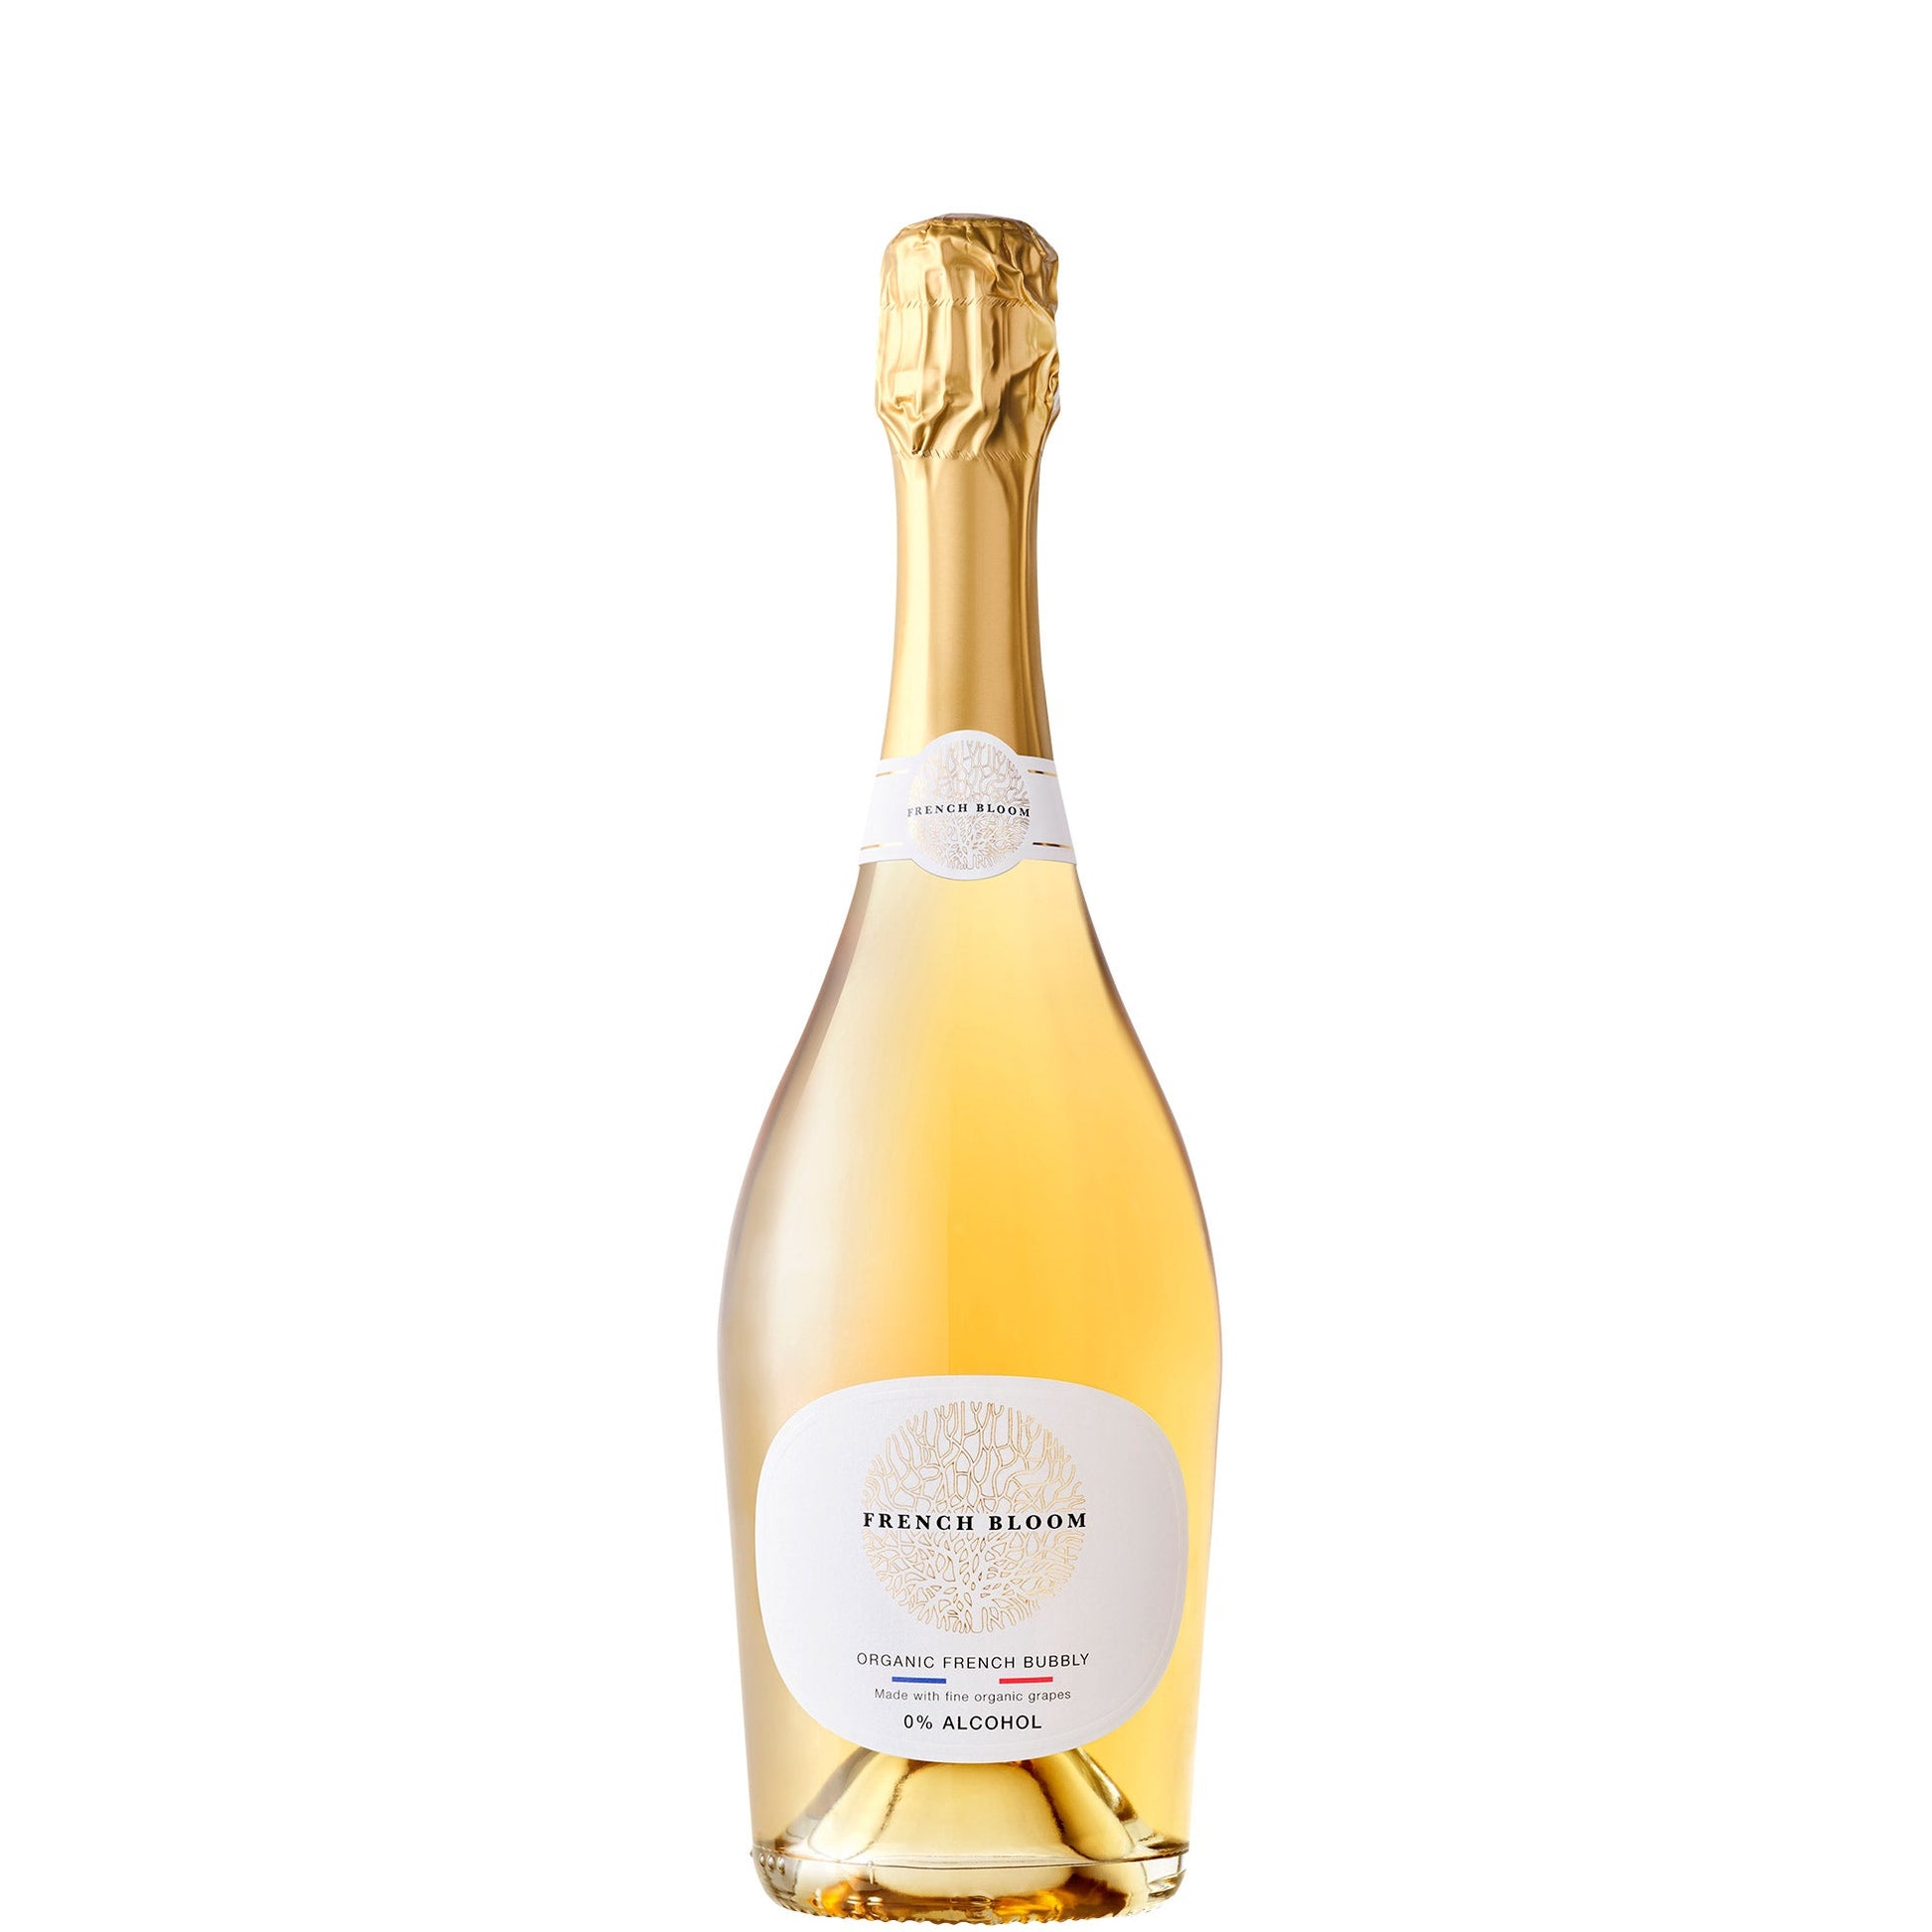 French Bloom, Le Blanc Organic French Bubbly 0%, Nv